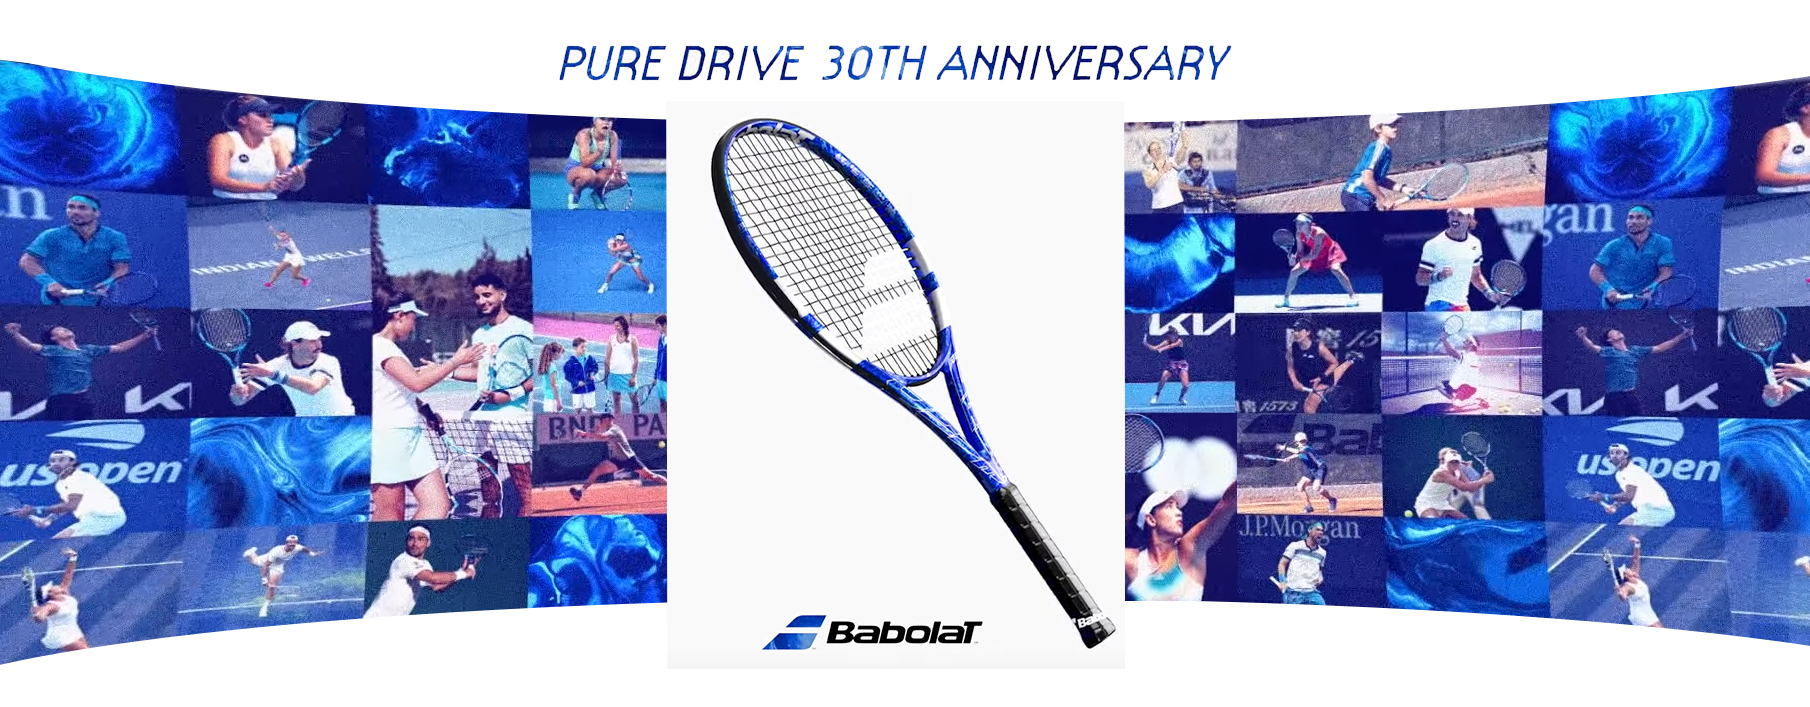 limited edition pure drive 30th anniversary